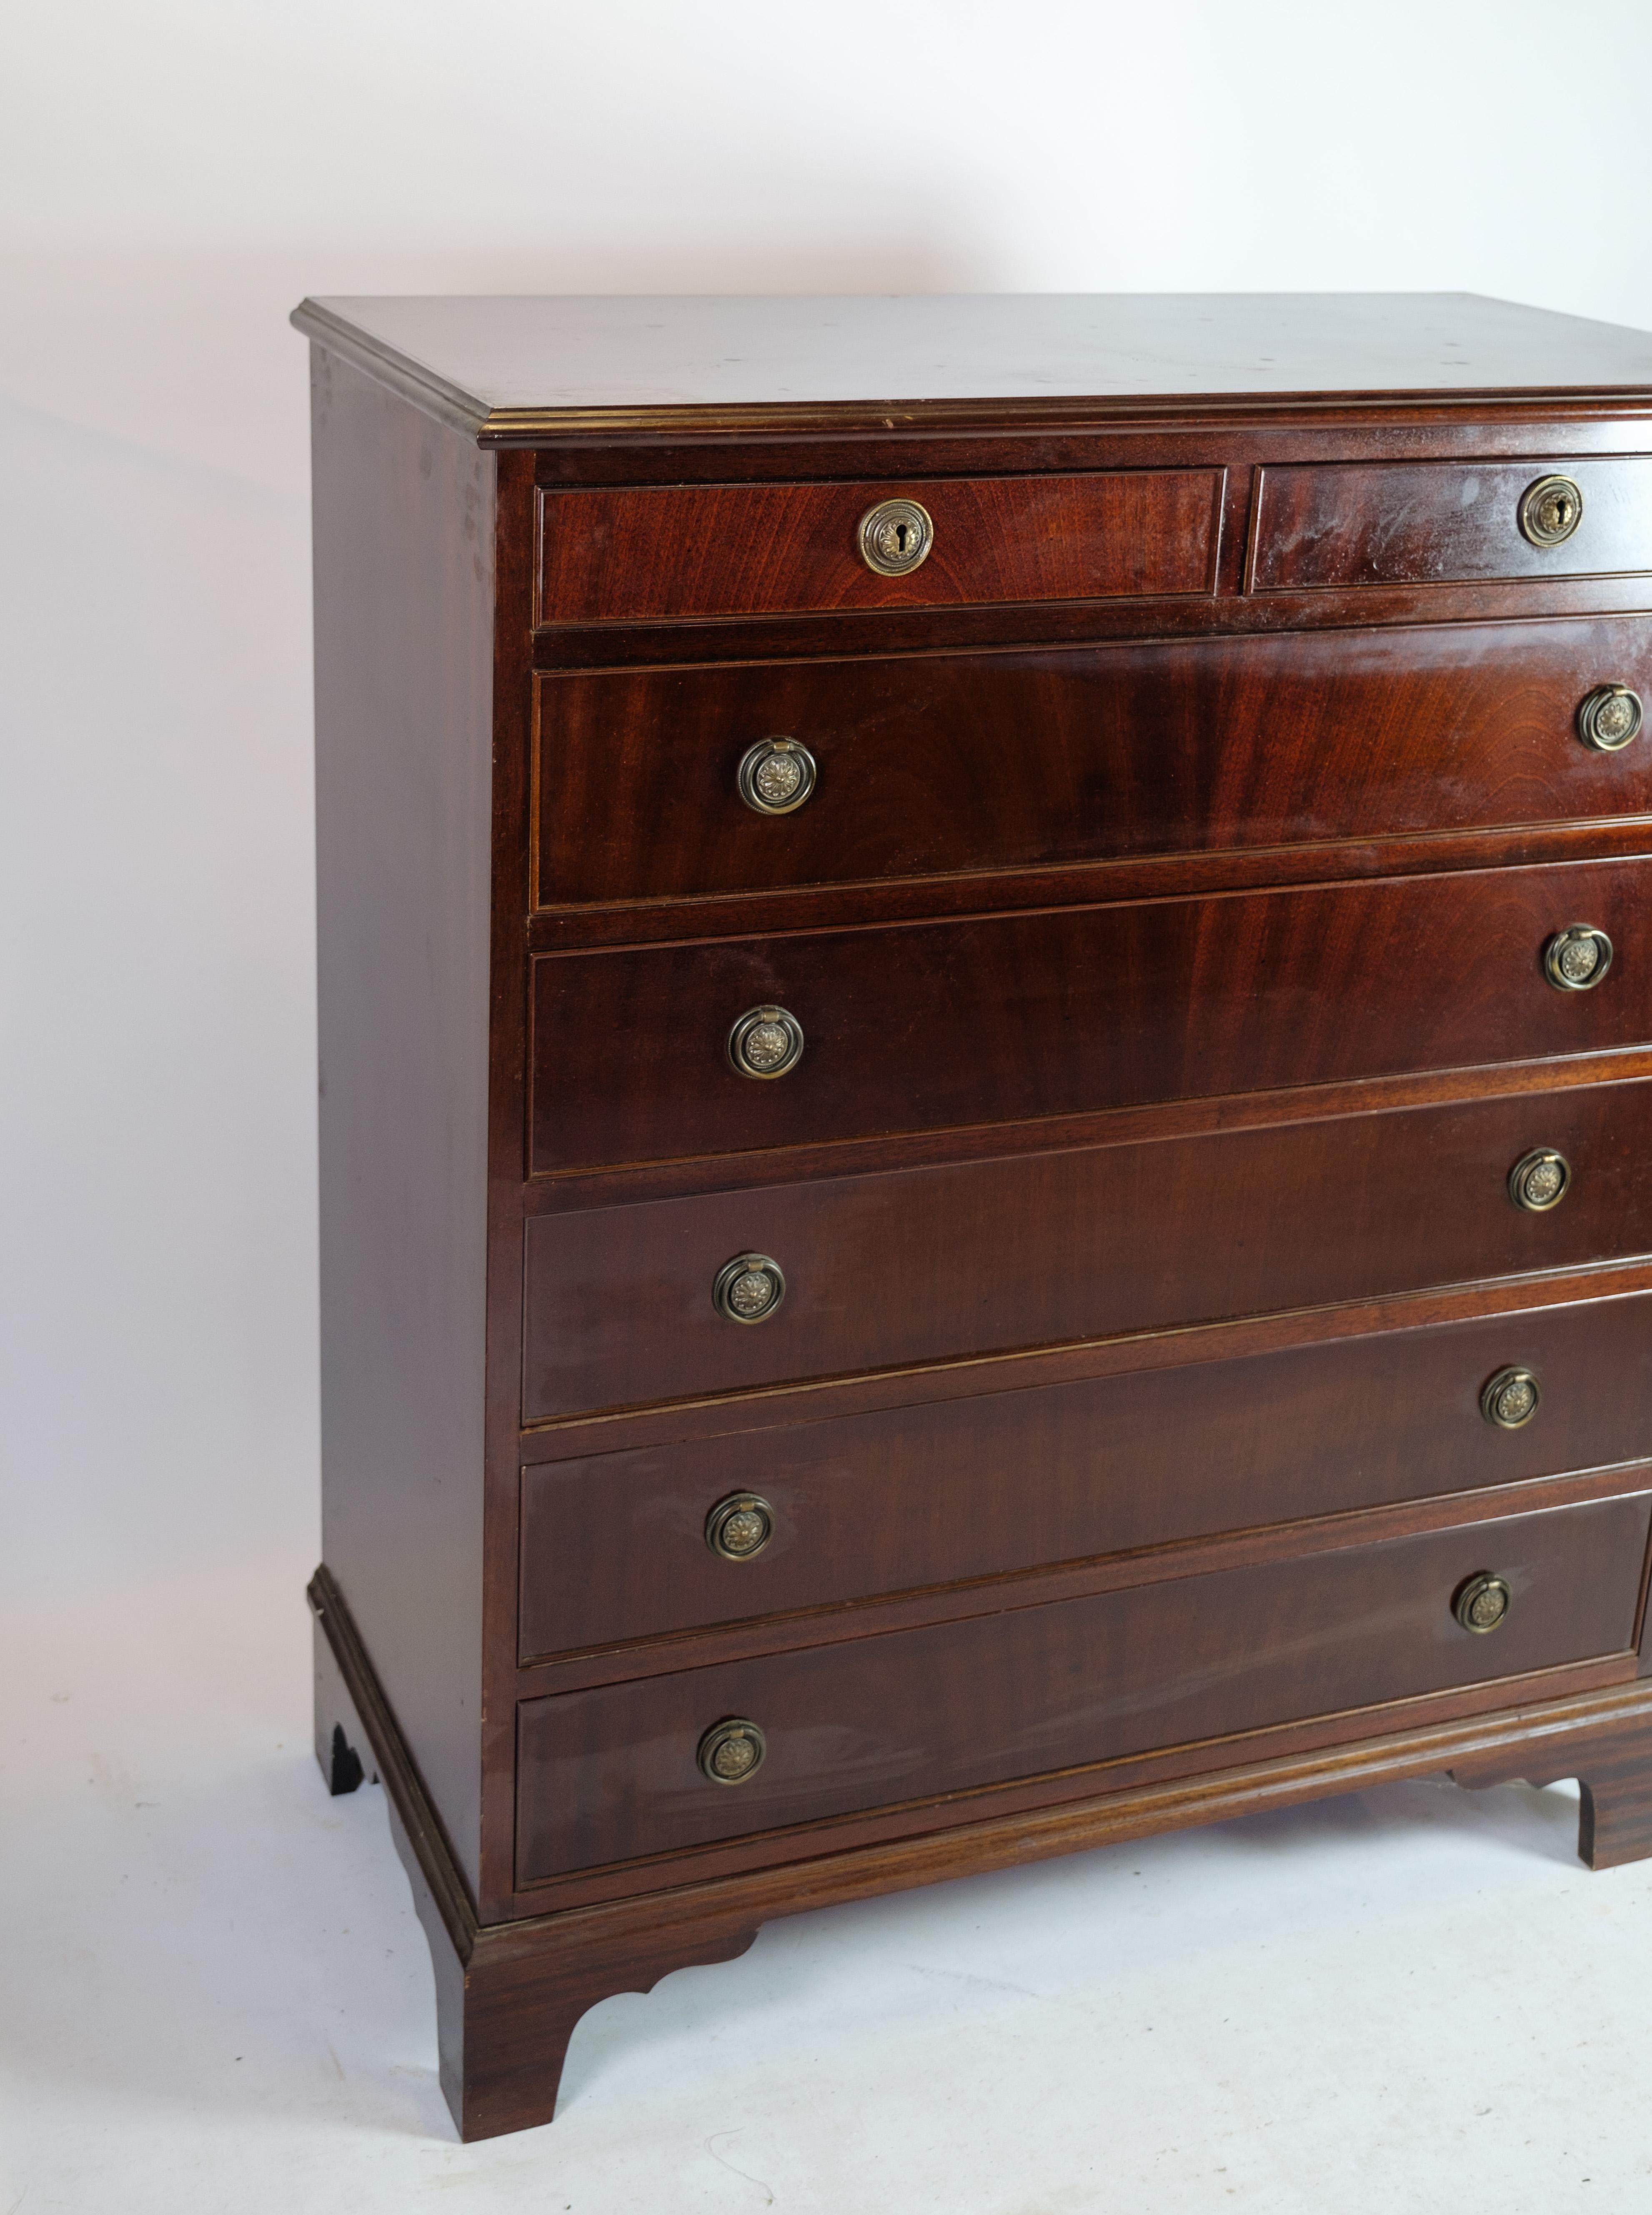 A 7 drawer polished mahogany chest of drawers from around the 1930s is a fantastic example of classic and elegant furniture design from the late 1800s adorned with beautiful brass handles.

Mahogany wood is an exclusive wood with a rich and deep